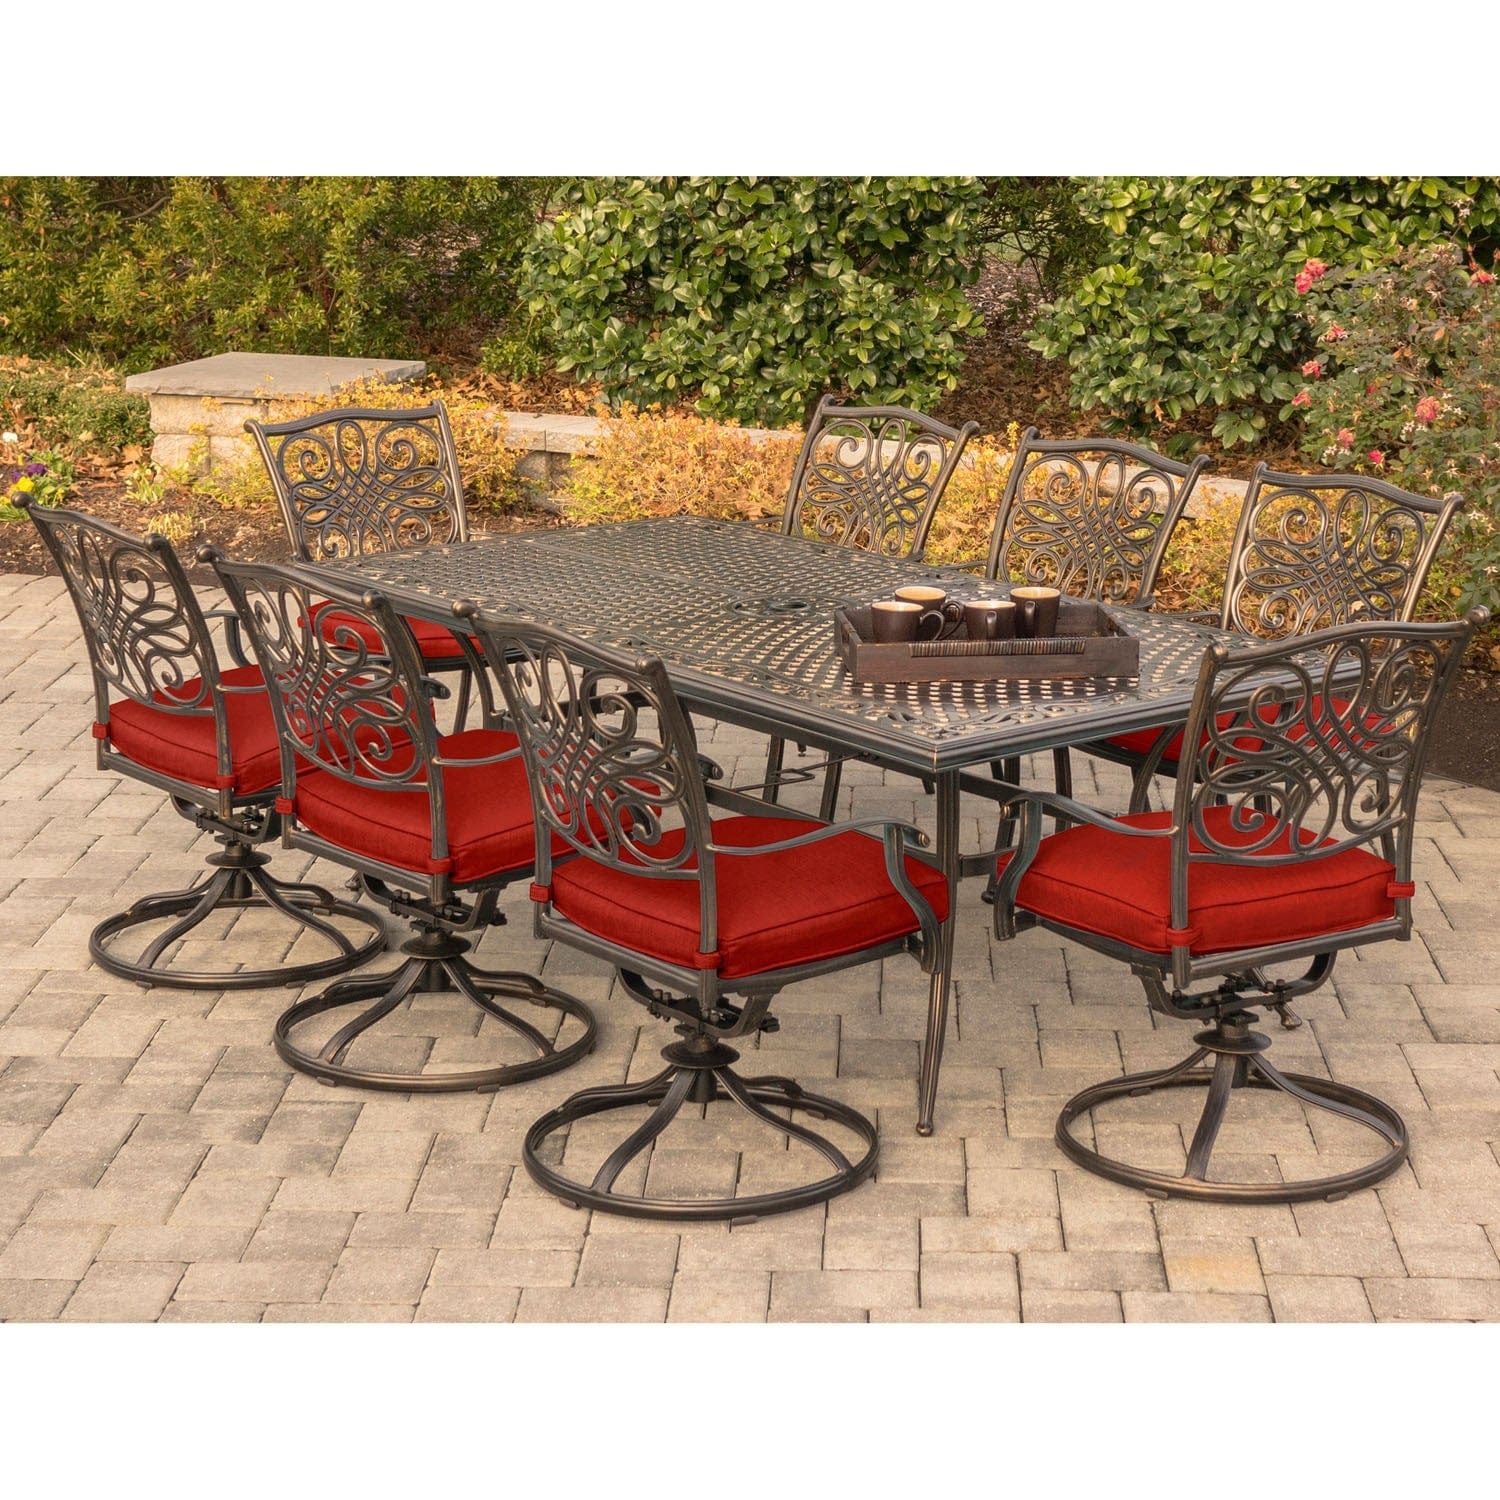 Hanover Outdoor Dining Set Hanover - Traditions 9-Piece Aluminium Frame Dining Set in Red with 8 Swivel Rockers and a 84" x 42" Cast-top Dining Table | TRAD9PCSW8-RED